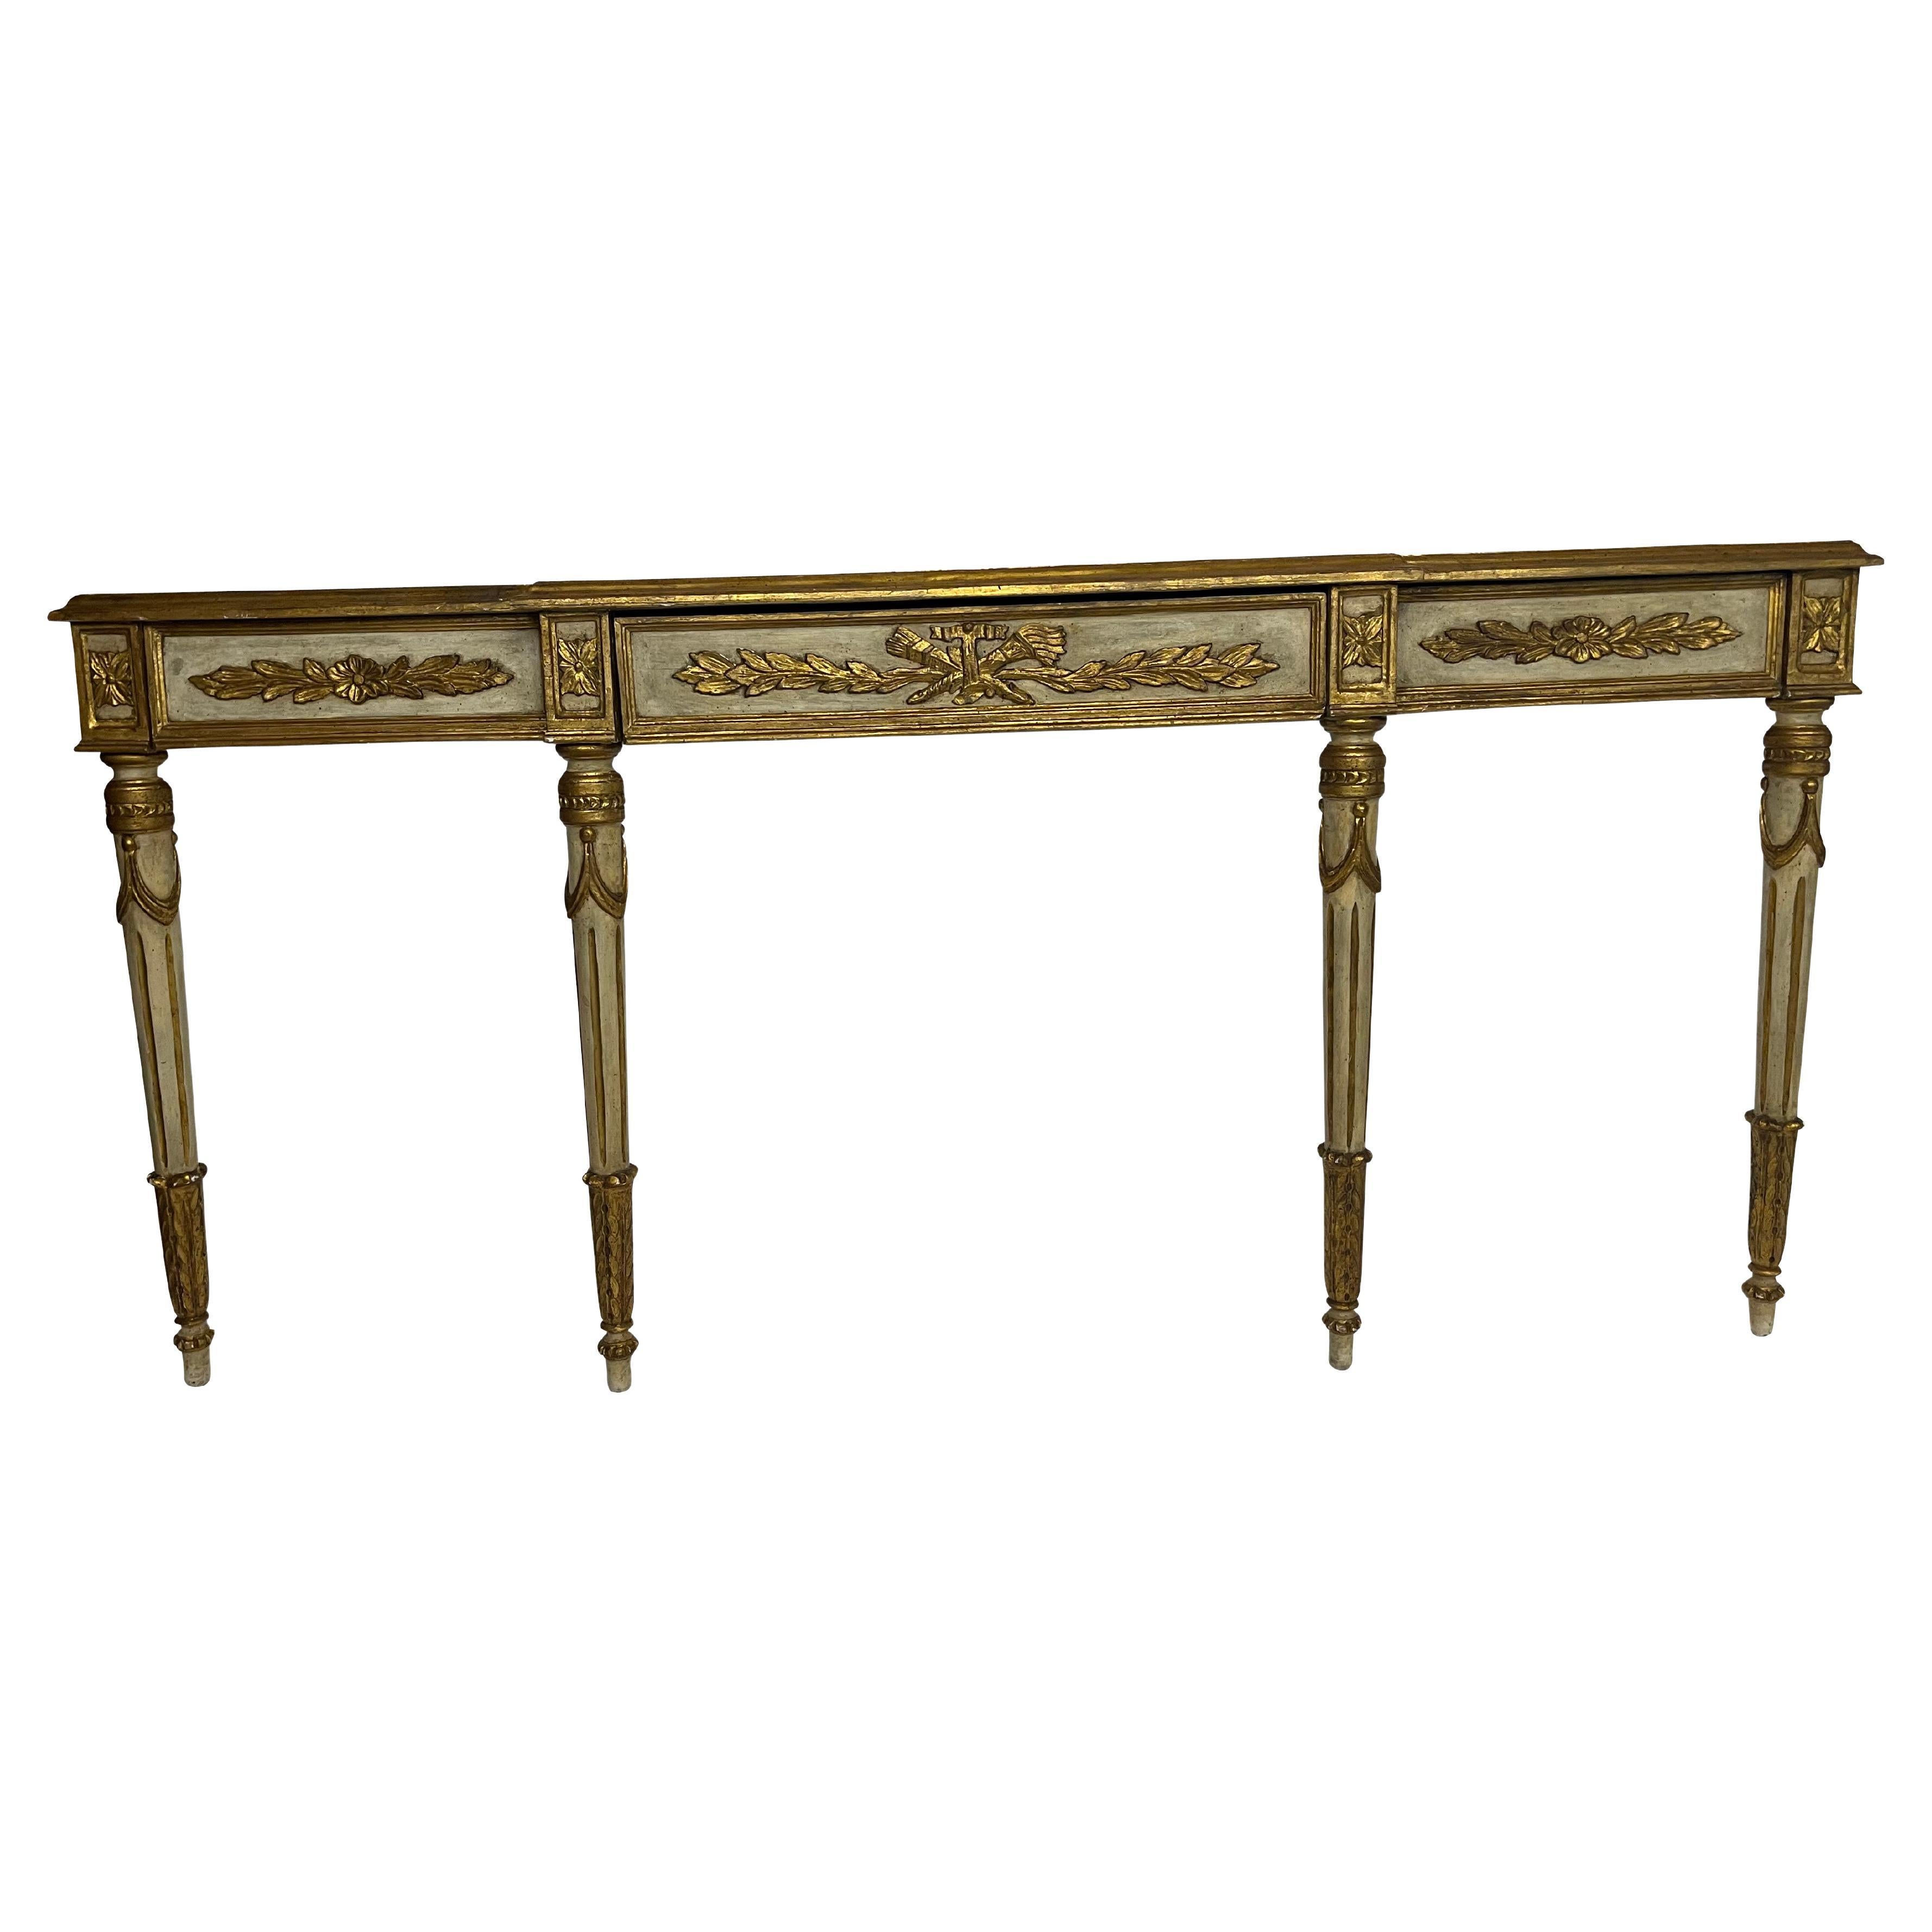 Mid century Venetian paint and gilt decorated console table 3 drawer - Measures 34 H x 72 L x 16.5 D with reeded legs ending in base with acanthus leaf decoration. Gilt decoration throughout with three working draws decorated with rosettes, floral